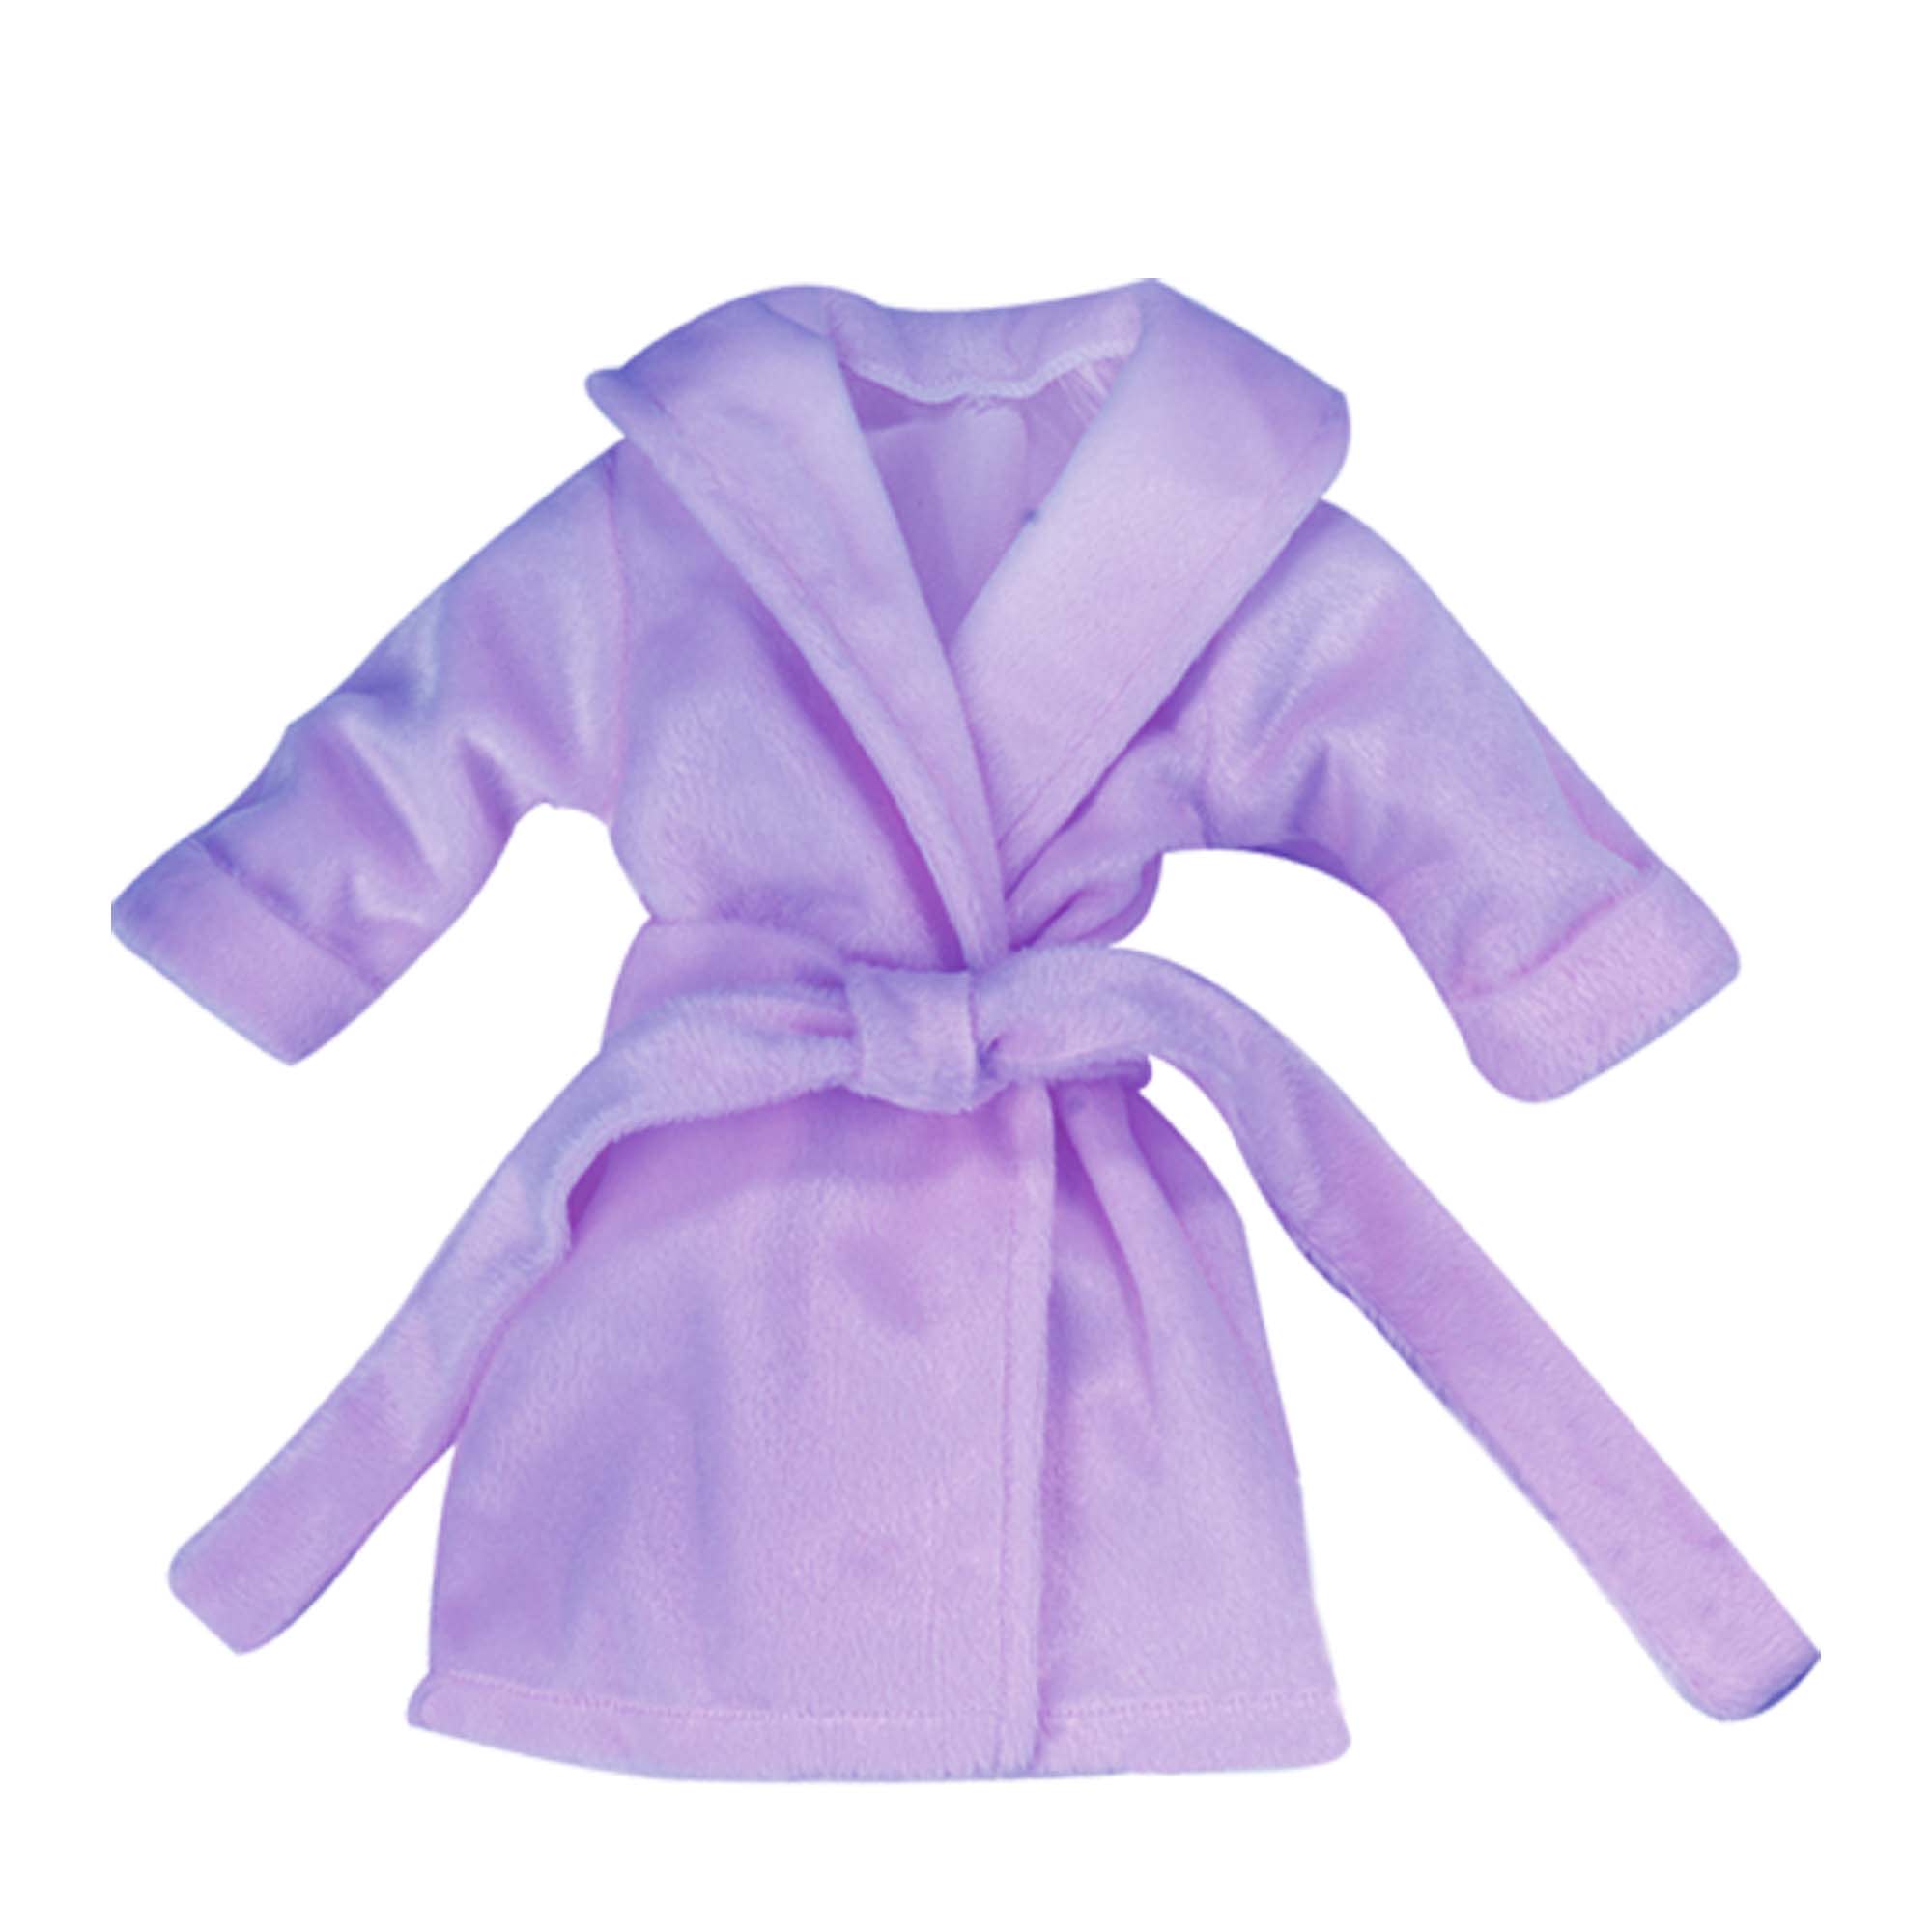 Sophia’s Luxuriously Soft Velour Spa Day Solid-Colored Bathrobe for 18” Dolls, Lavender